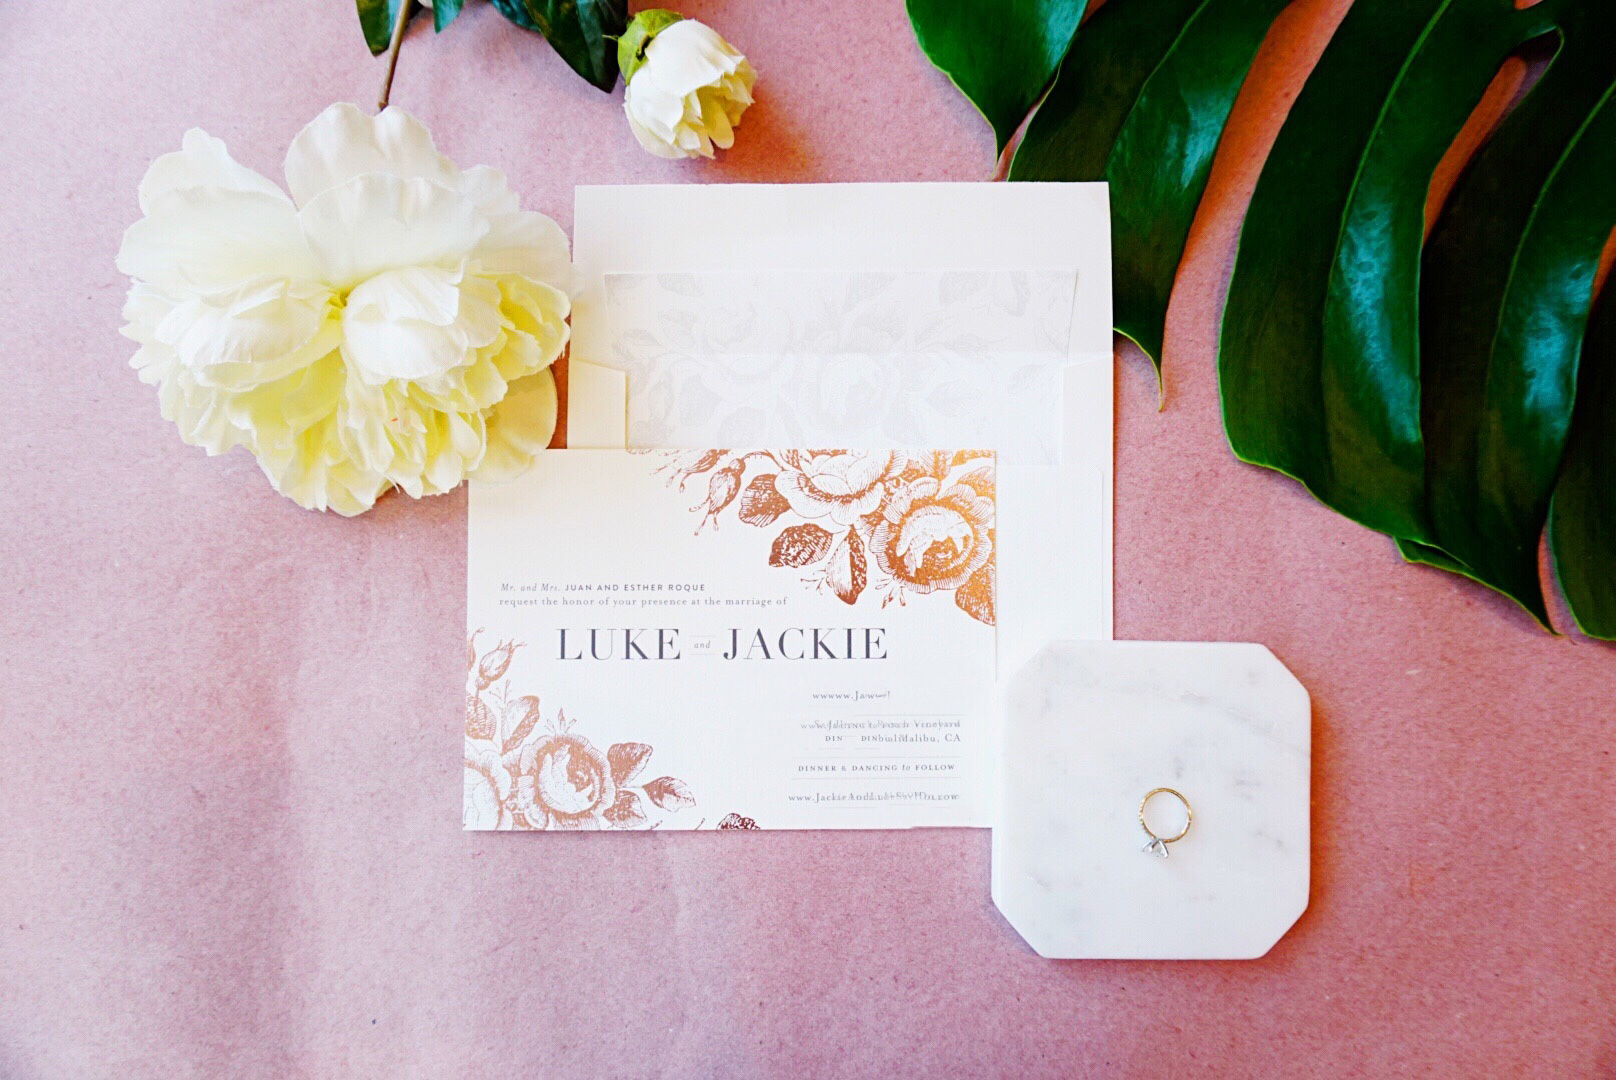 Jackie Roque styling her wedding invitations by Minted.